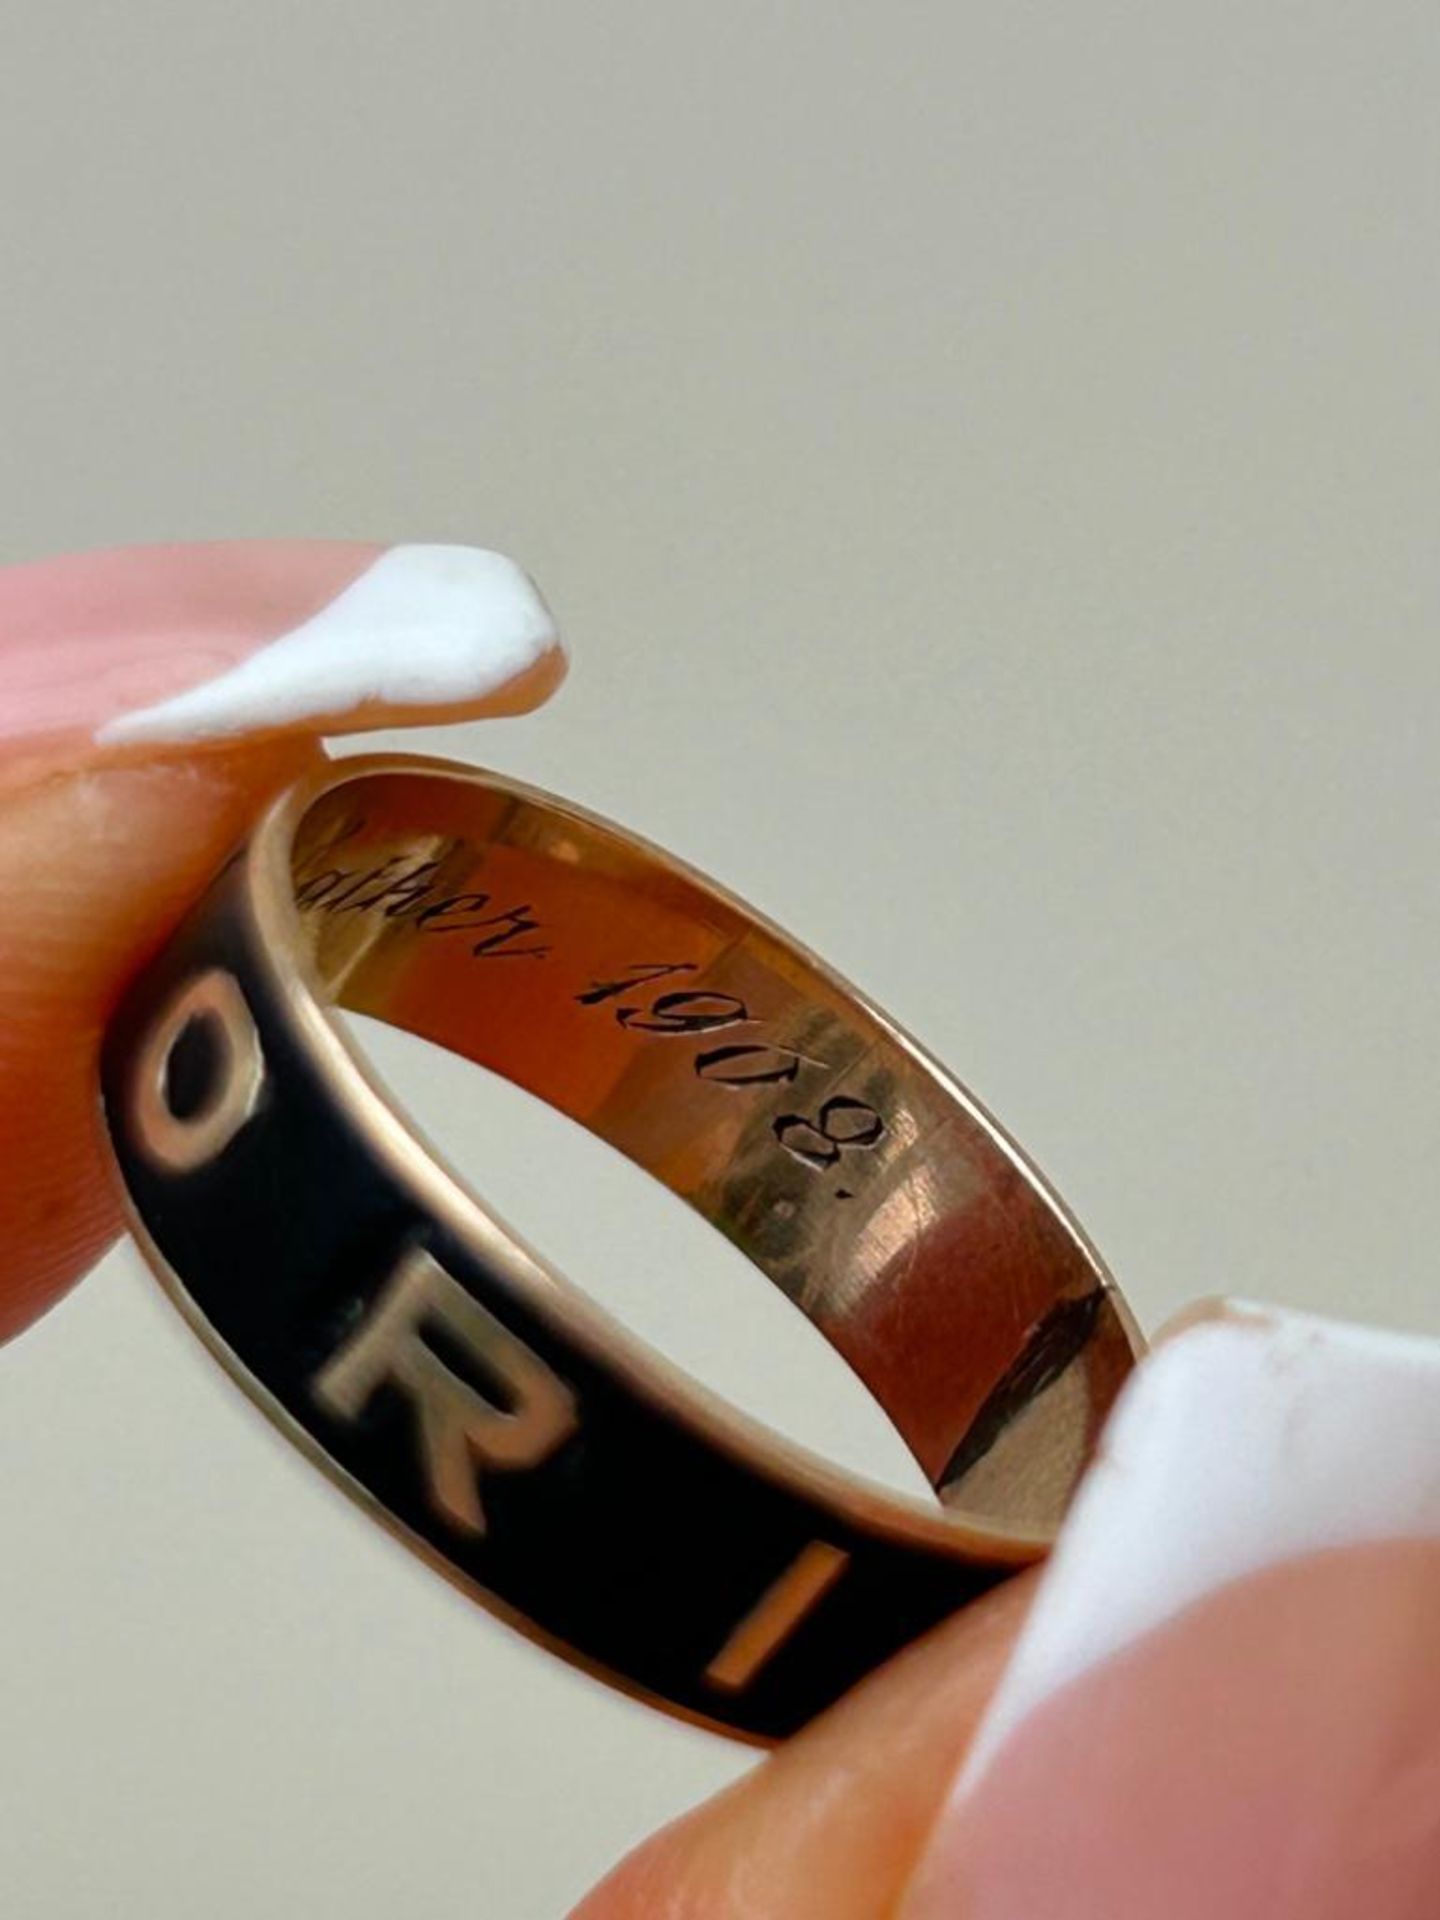 Antique Black Enamel Mourning Band Ring with Inscription in 18ct Yellow Gold - Image 10 of 10